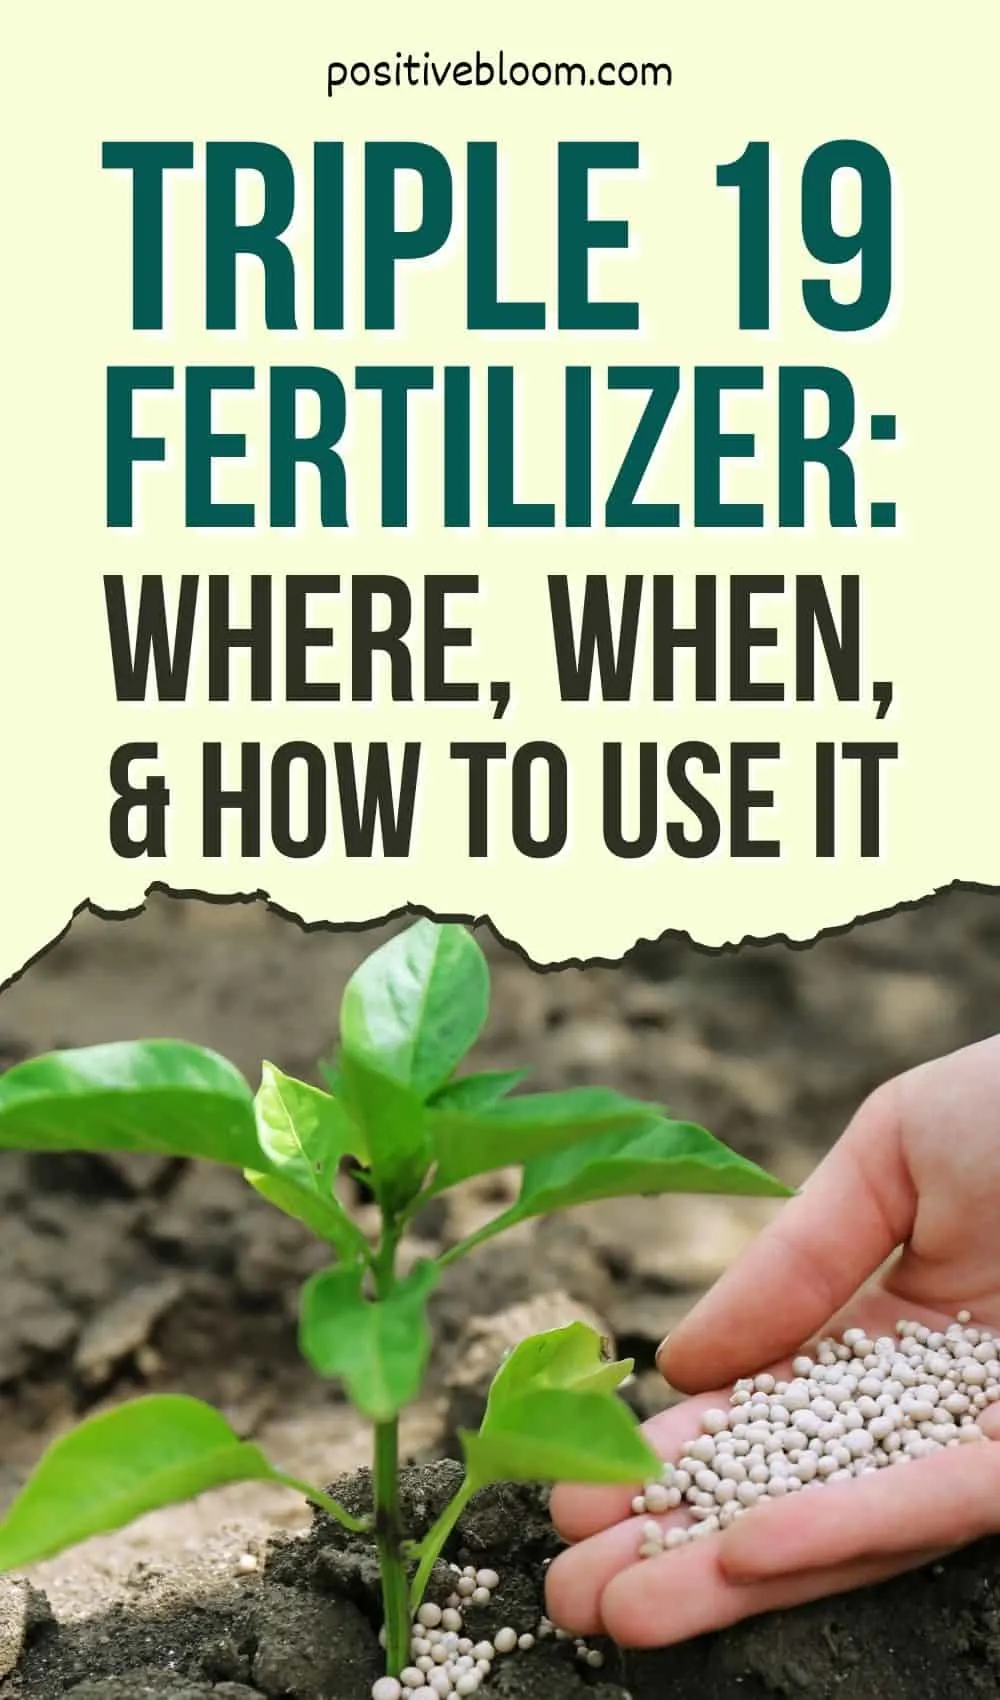 Triple 19 Fertilizer Where, When, And How To Use It